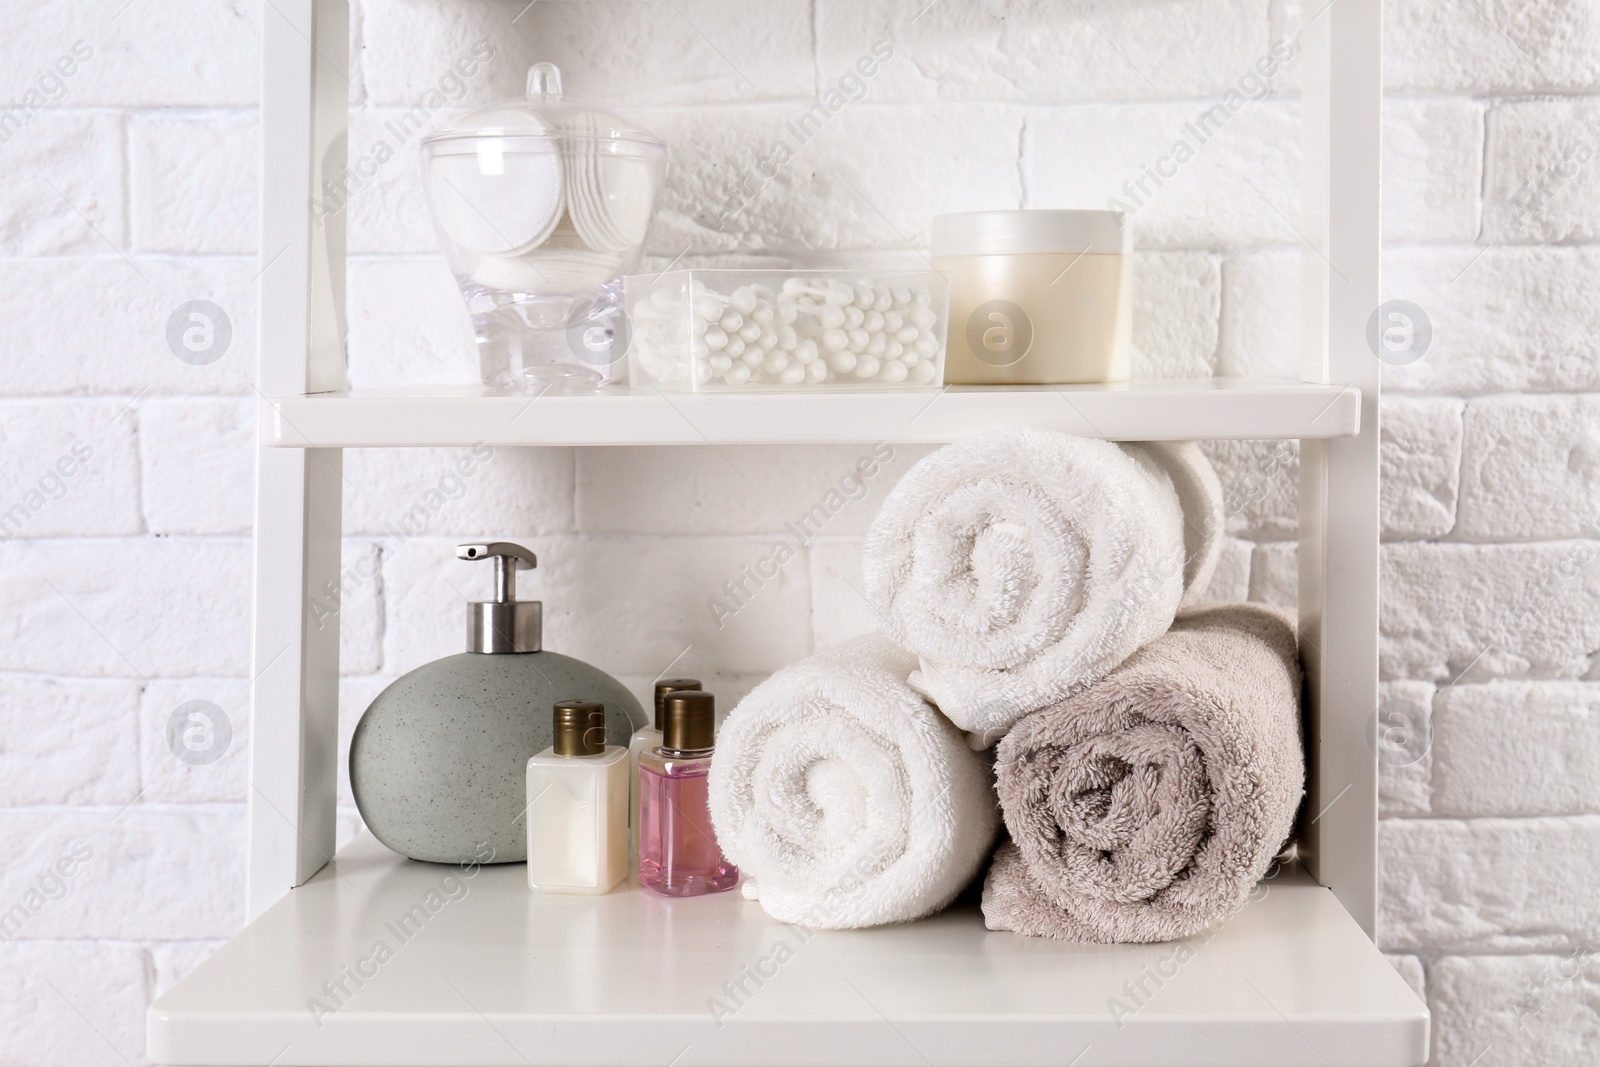 Photo of Shelving unit with clean towels and toiletries near brick wall